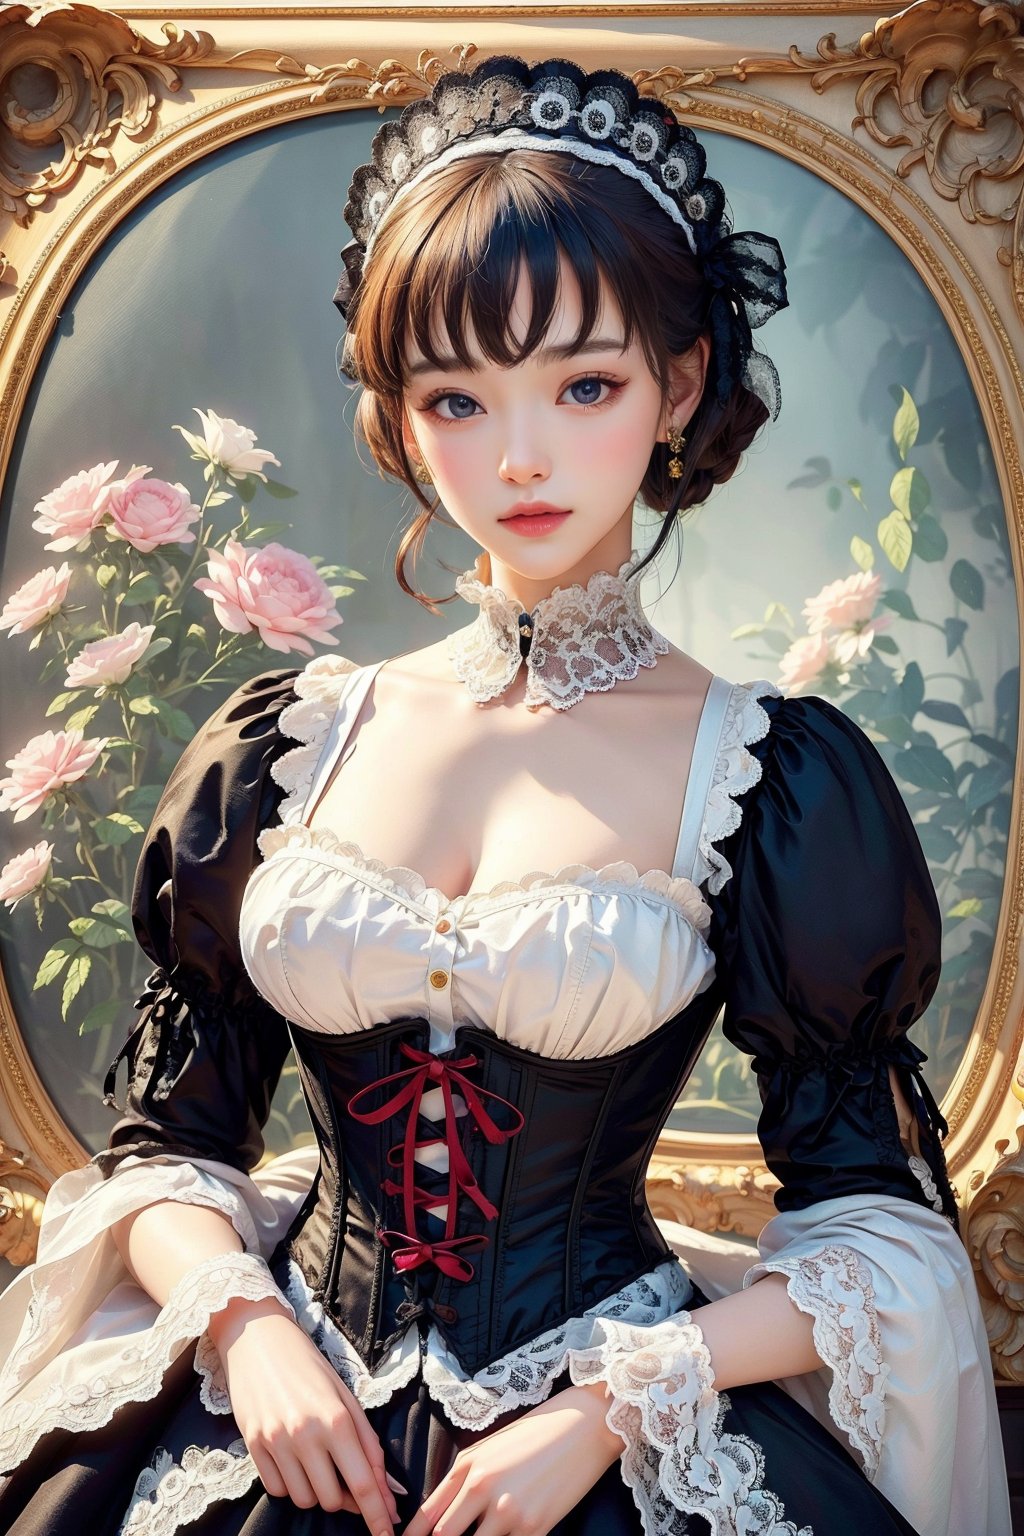 busty and sexy girl, 8k, masterpiece, ultra-realistic, best quality, high resolution, high definition, Lolita, maid, Victorian fashion, Rococo fashion, black corset with red ribbon lacing, White lace details on the sleeves, Puffed sleeves, headpiece adorned with flowers, ornate flower frame background, historical vibe, historical fashion with fantasy elements,lolitabusty and sexy girl, 8k, masterpiece, ultra-realistic, best quality, high resolution, high definition, Lolita, maid, Victorian fashion, Rococo fashion, black corset with red ribbon lacing, White lace details on the sleeves, Puffed sleeves, headpiece adorned with flowers, ornate flower frame background, historical vibe, historical fashion with fantasy elements,lolita